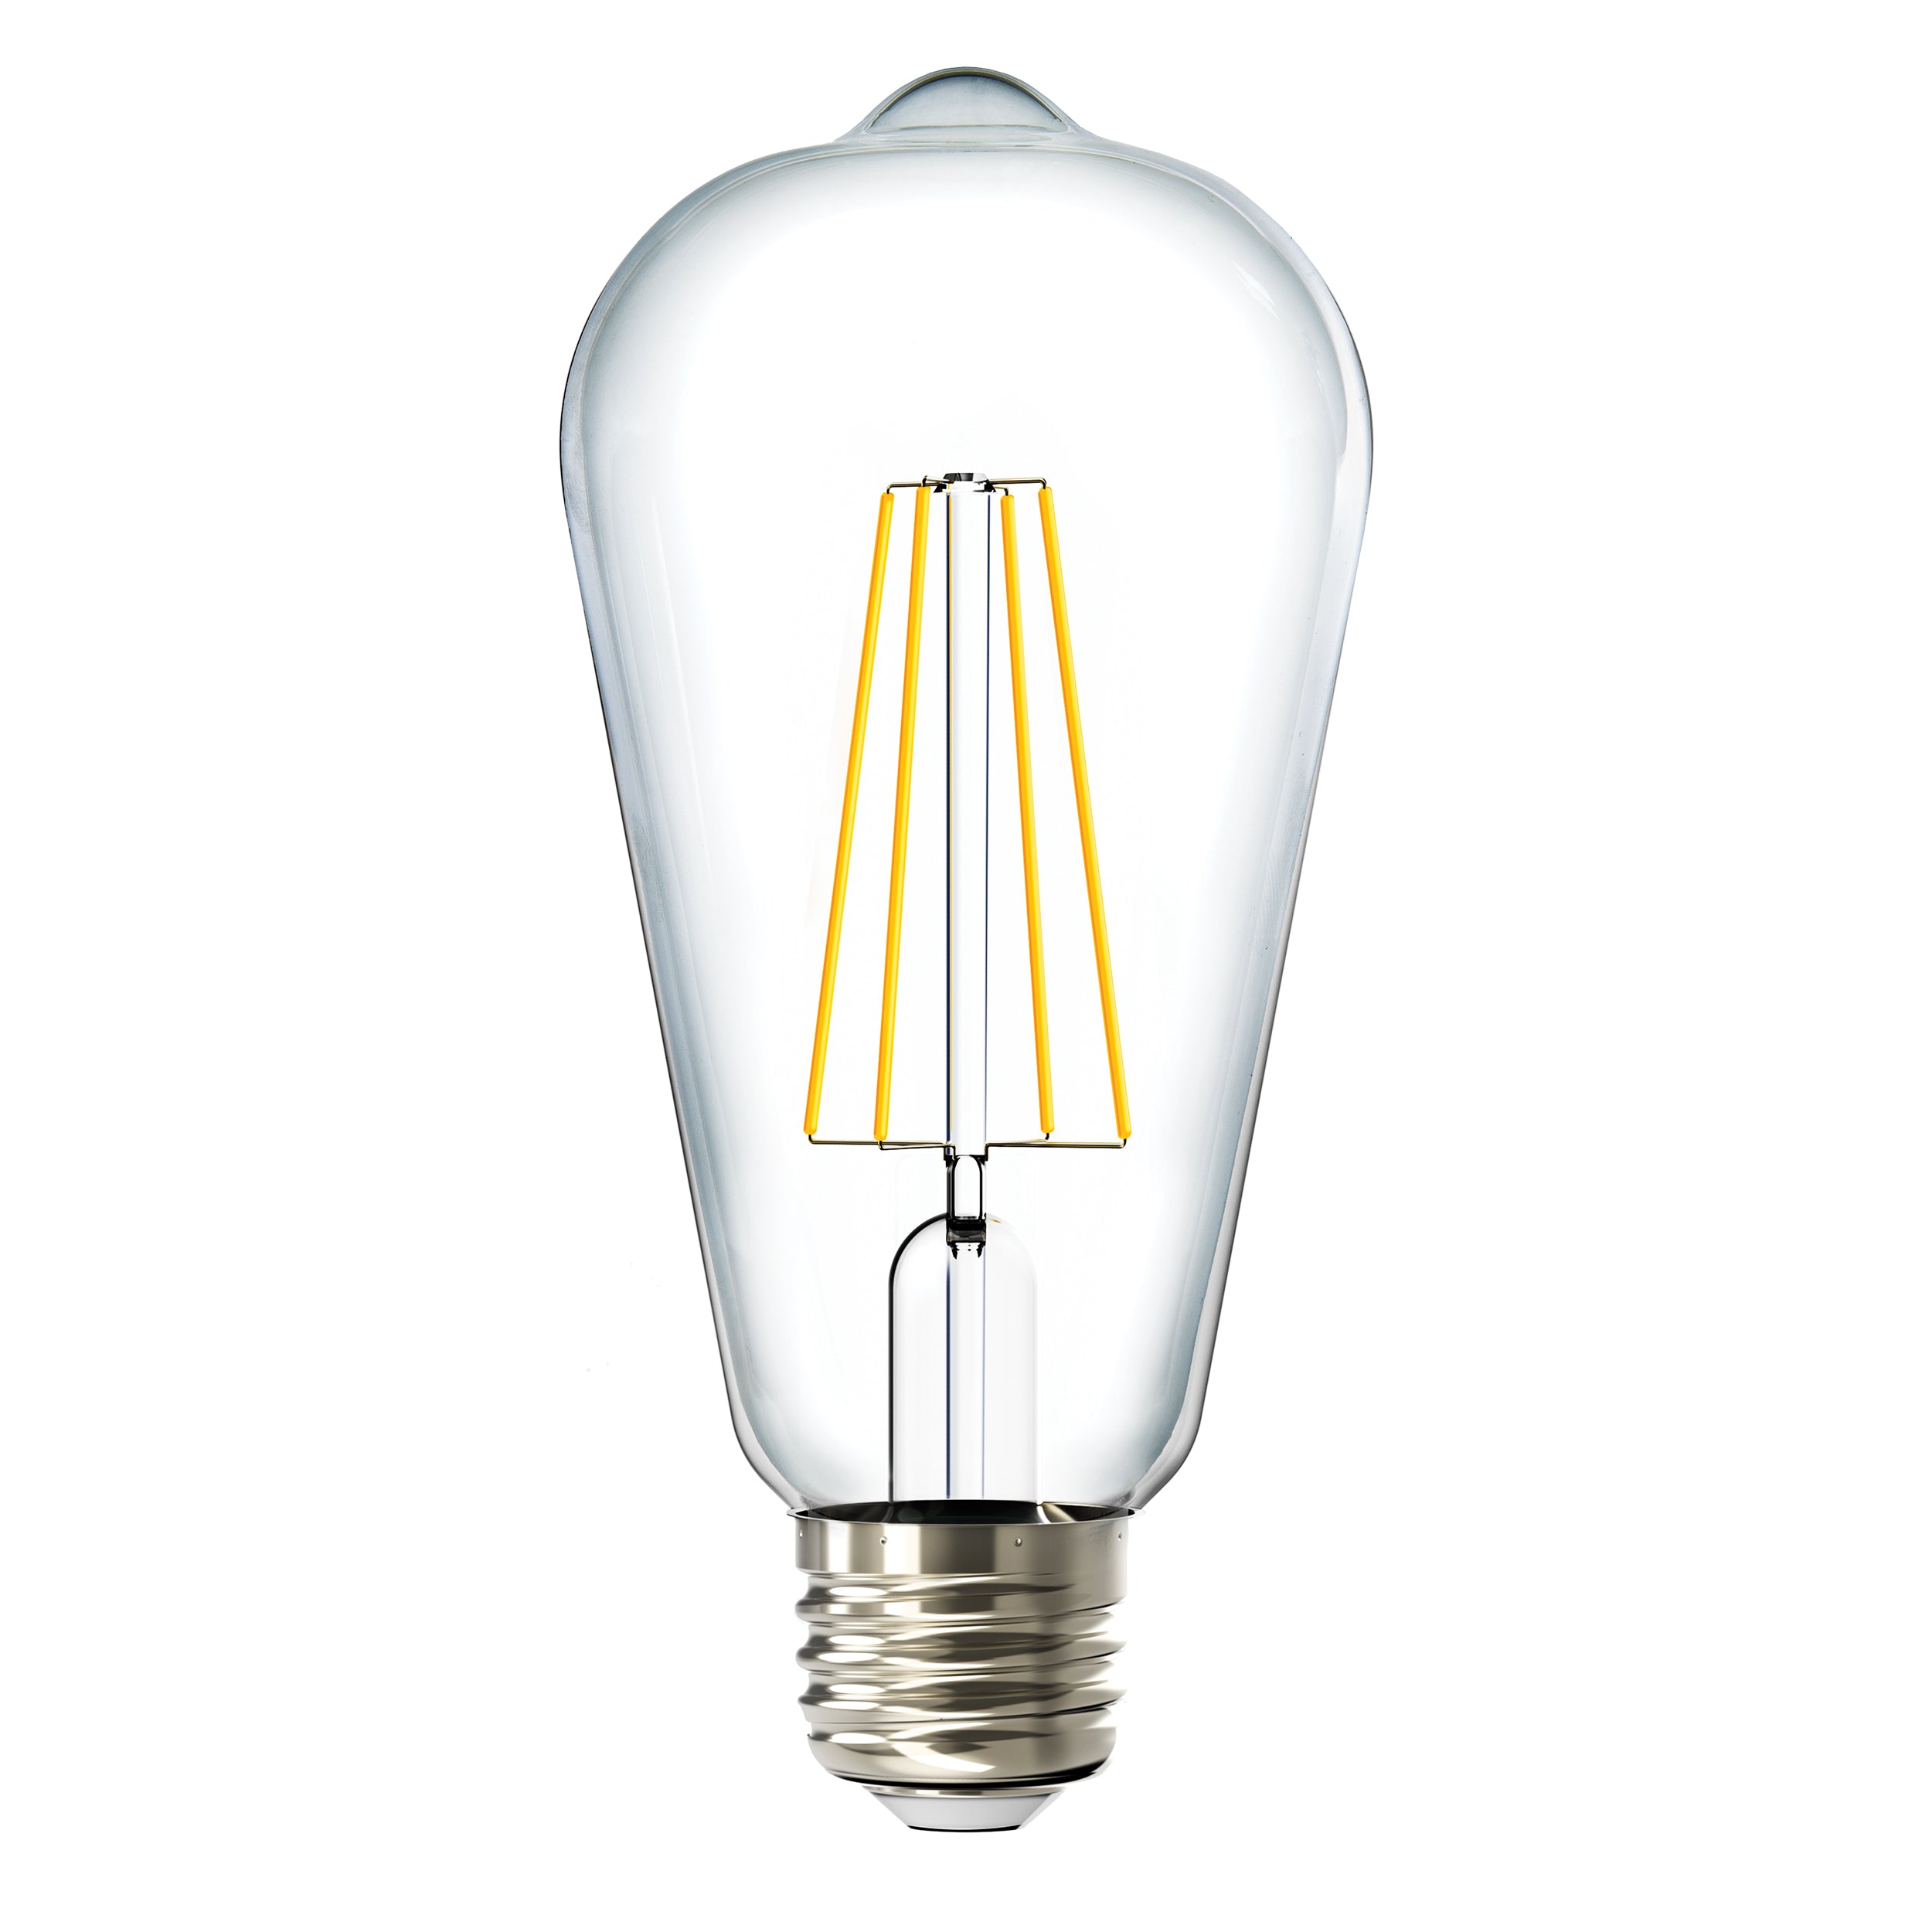 The unique vintage style of the Sunco ST64 LED Filament Bulb provides the retro look of a popular Edison-style light bulb. Features clear glass housing with an exposed LED Filament inside it. Also known as an ST19 Filament Bulb. Here the light bulb is turned off to show you the high tech LED filament when it is not illuminated. This dimmable bulb is waterproof for outside and indoor lighting solutions. 8.5W=60W with 800 lumens bright light.